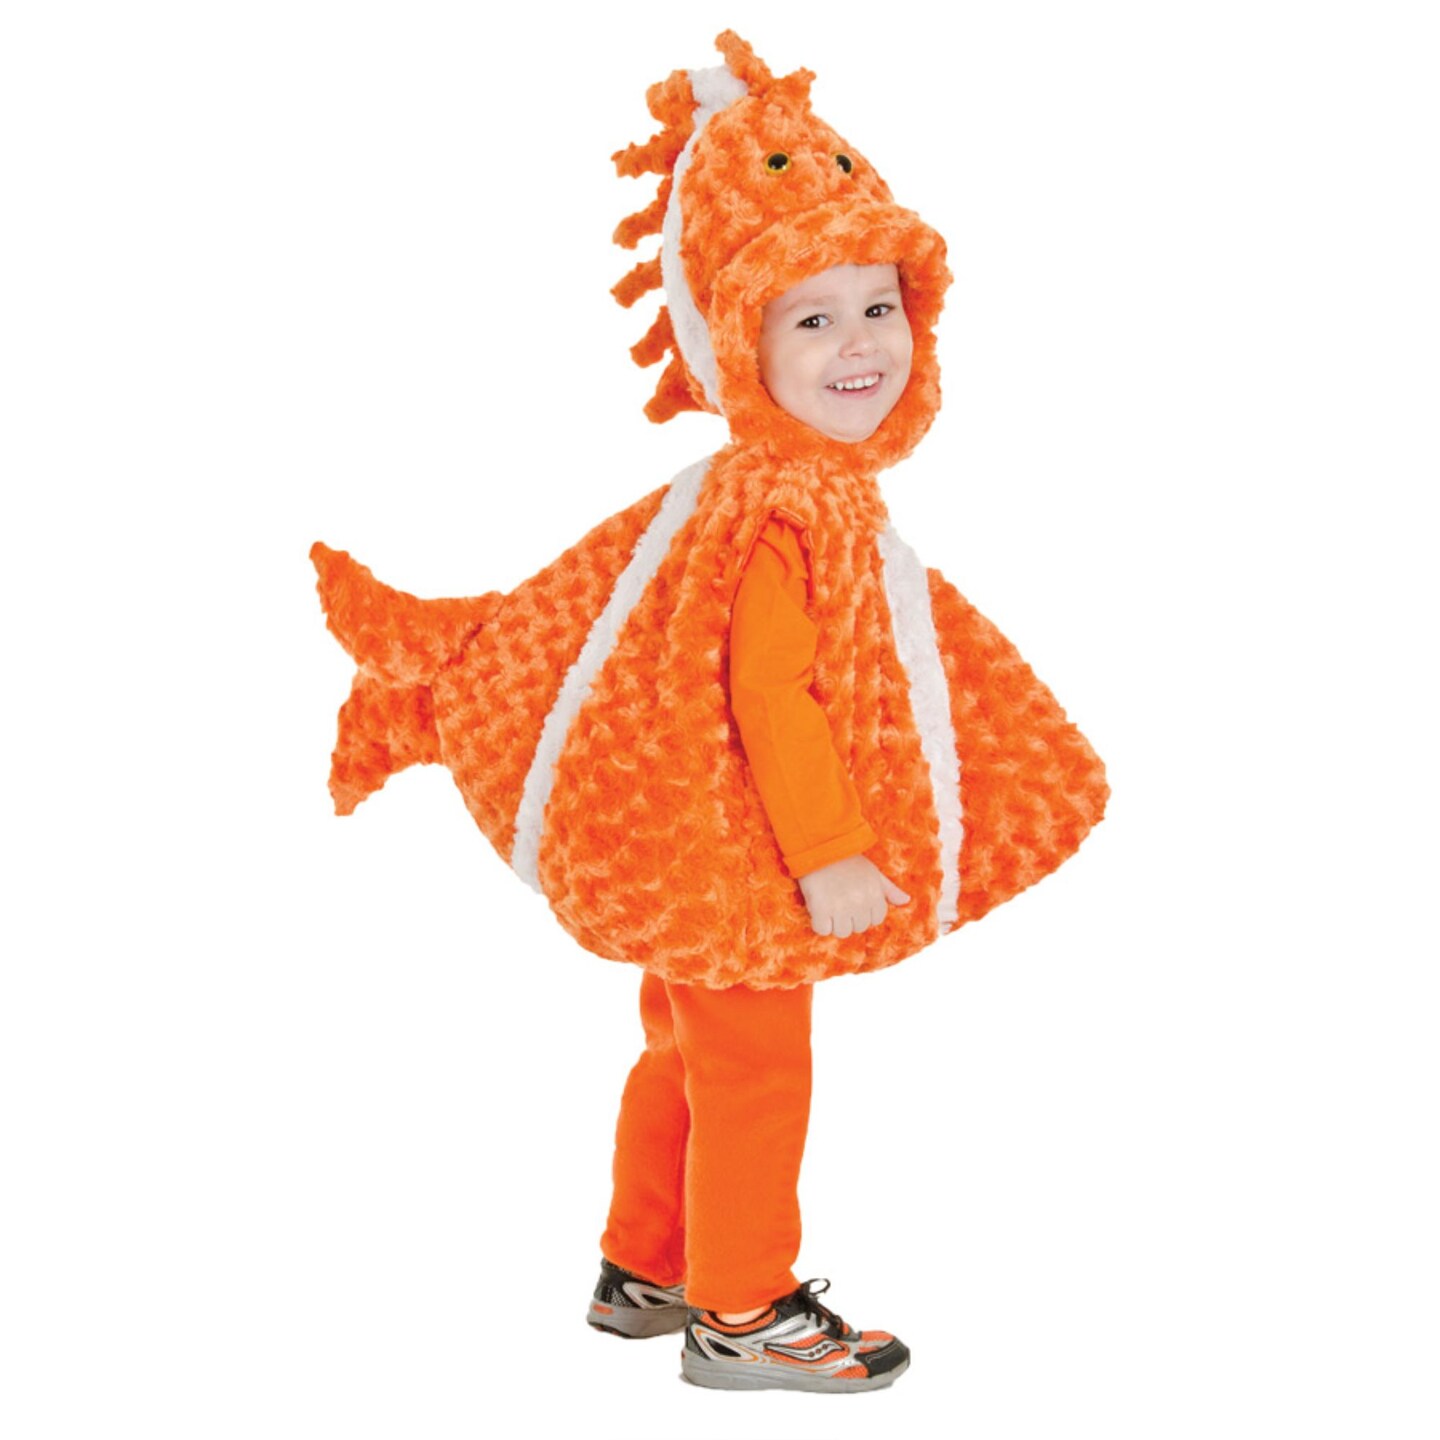 The Costume Center Orange and White Big Mouth Clown Fish Toddler